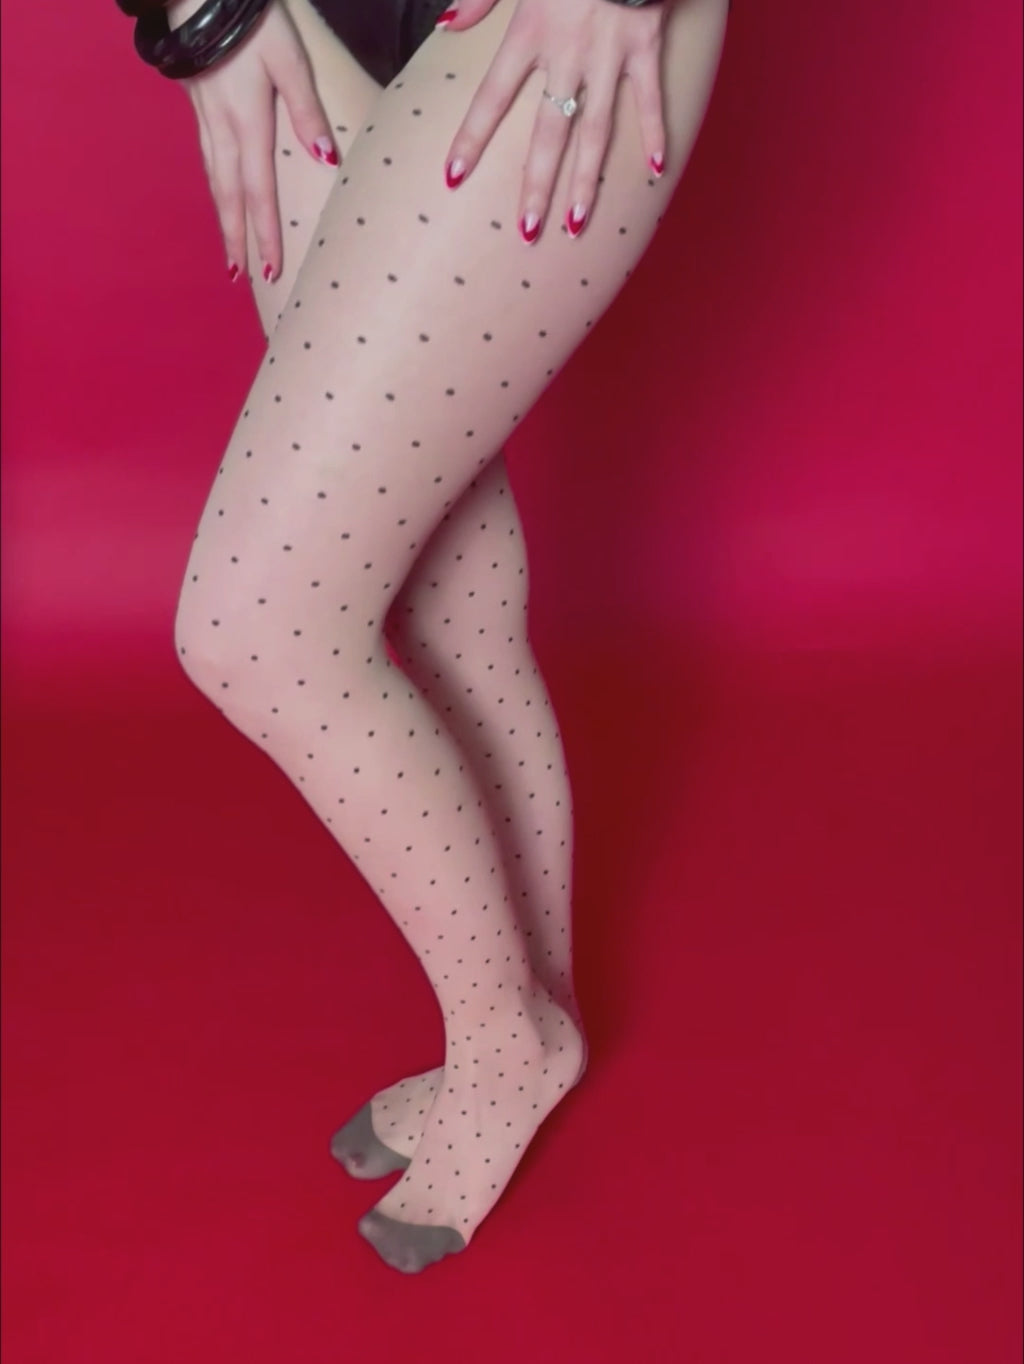 1950s polka dot seamed tights worn with black satin lingerie